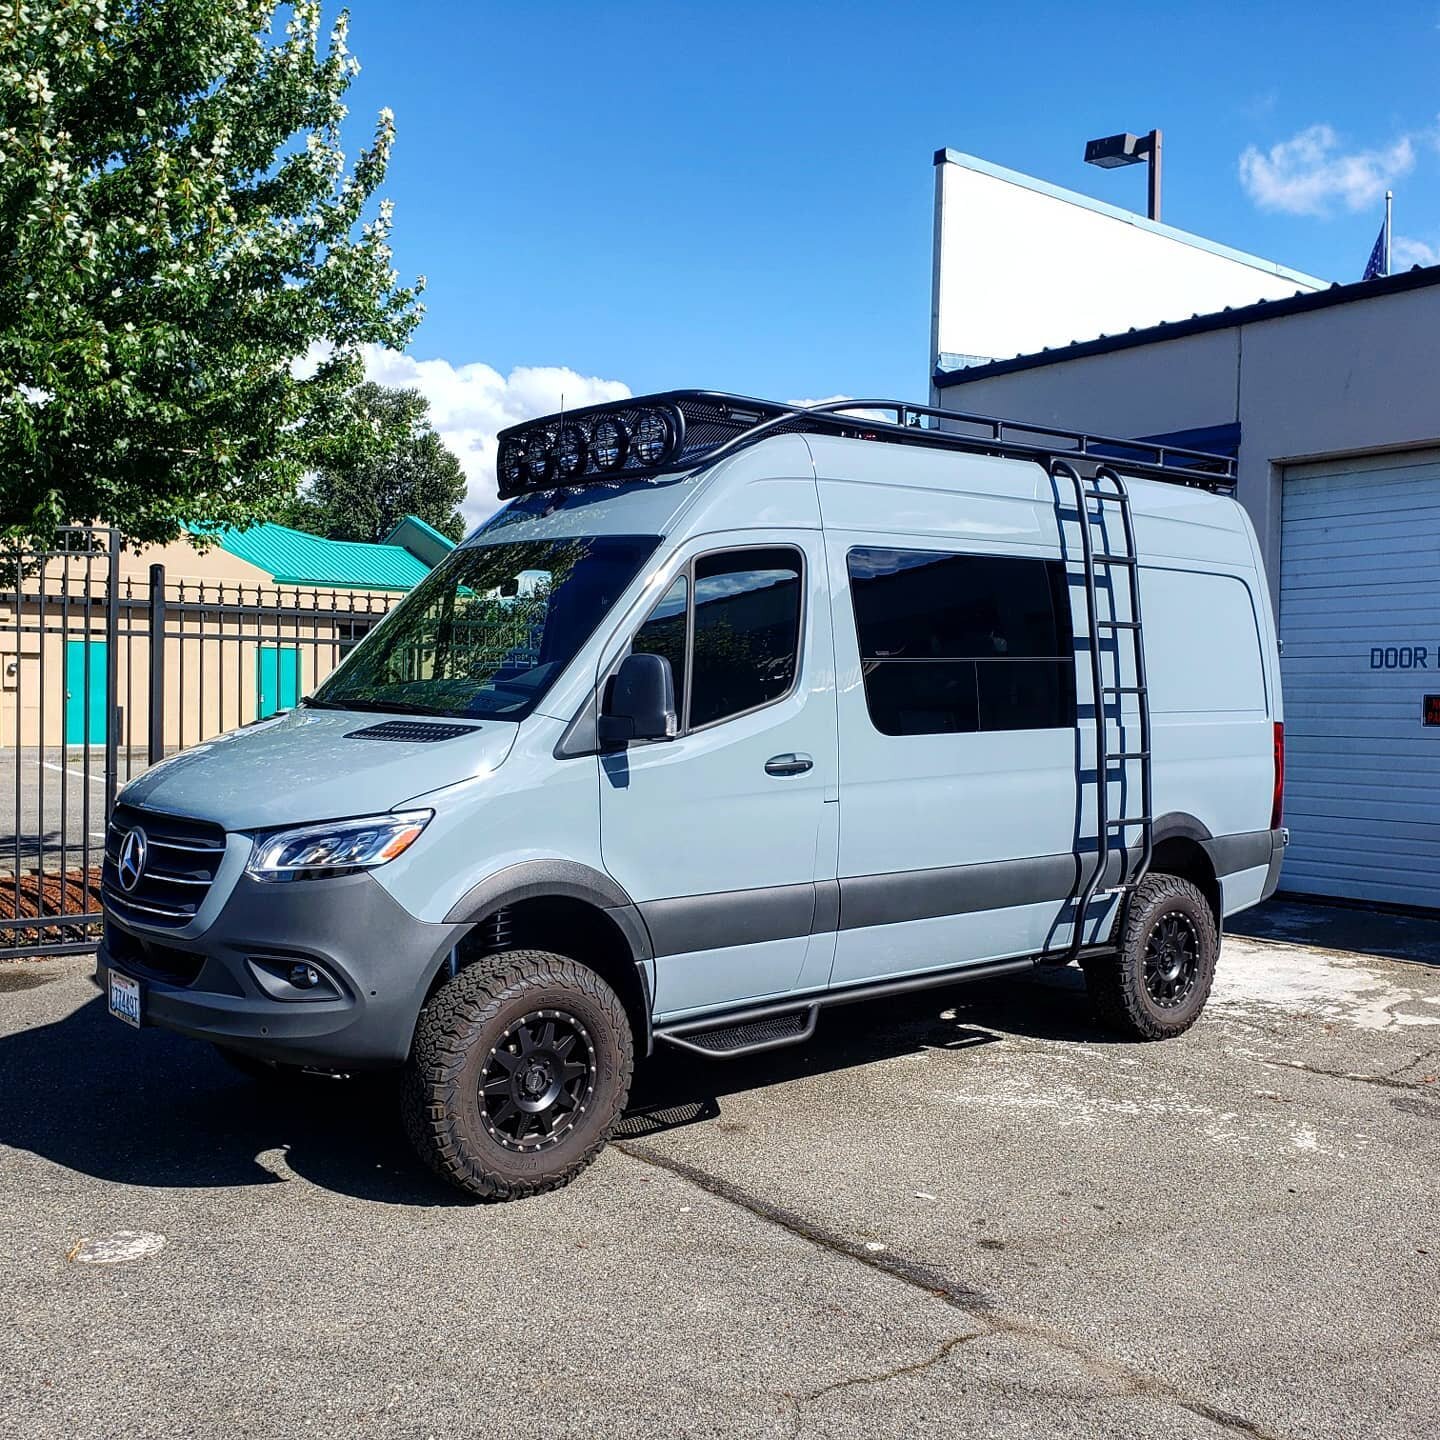 Who doesn't love a nice rack #amiright ??
.
.
So many racks lately its hard to keep track! No road too dark or hedge to tall for these bad boys
.
.
.
.
.
#mammothvans #vanconversion #campervan #sprintervan #mercedessprinter #vanlife #sprintervanconve